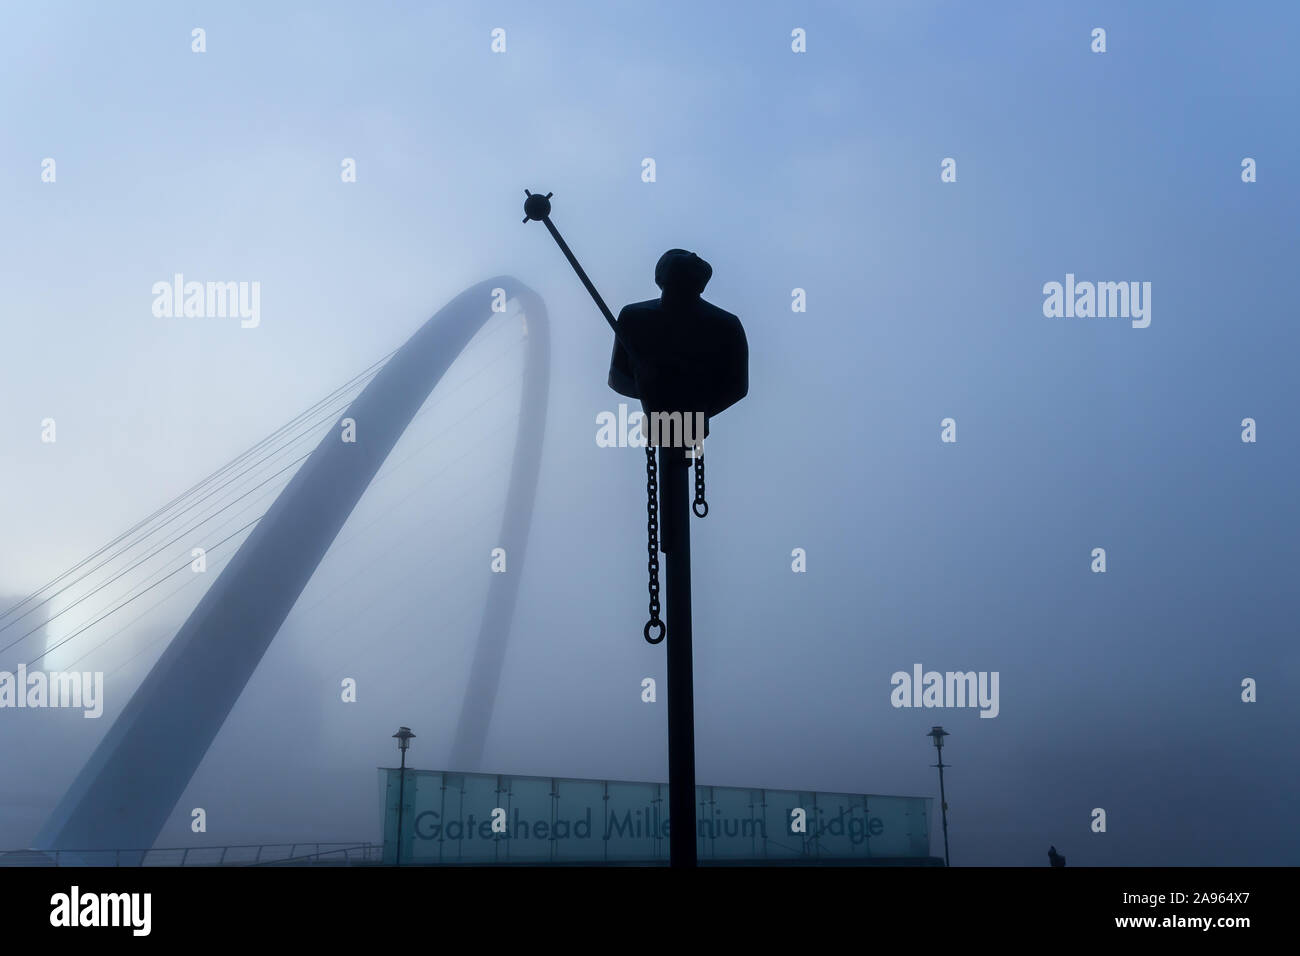 NEWCASTLE UPON TYNE, UK - NOVEMBER 09 2019: River God sculpture, by Andre Wallace, shrouded in fog with Gateshead Millennium Bridge in the background at the Quayside, Newcastle, UK Stock Photo